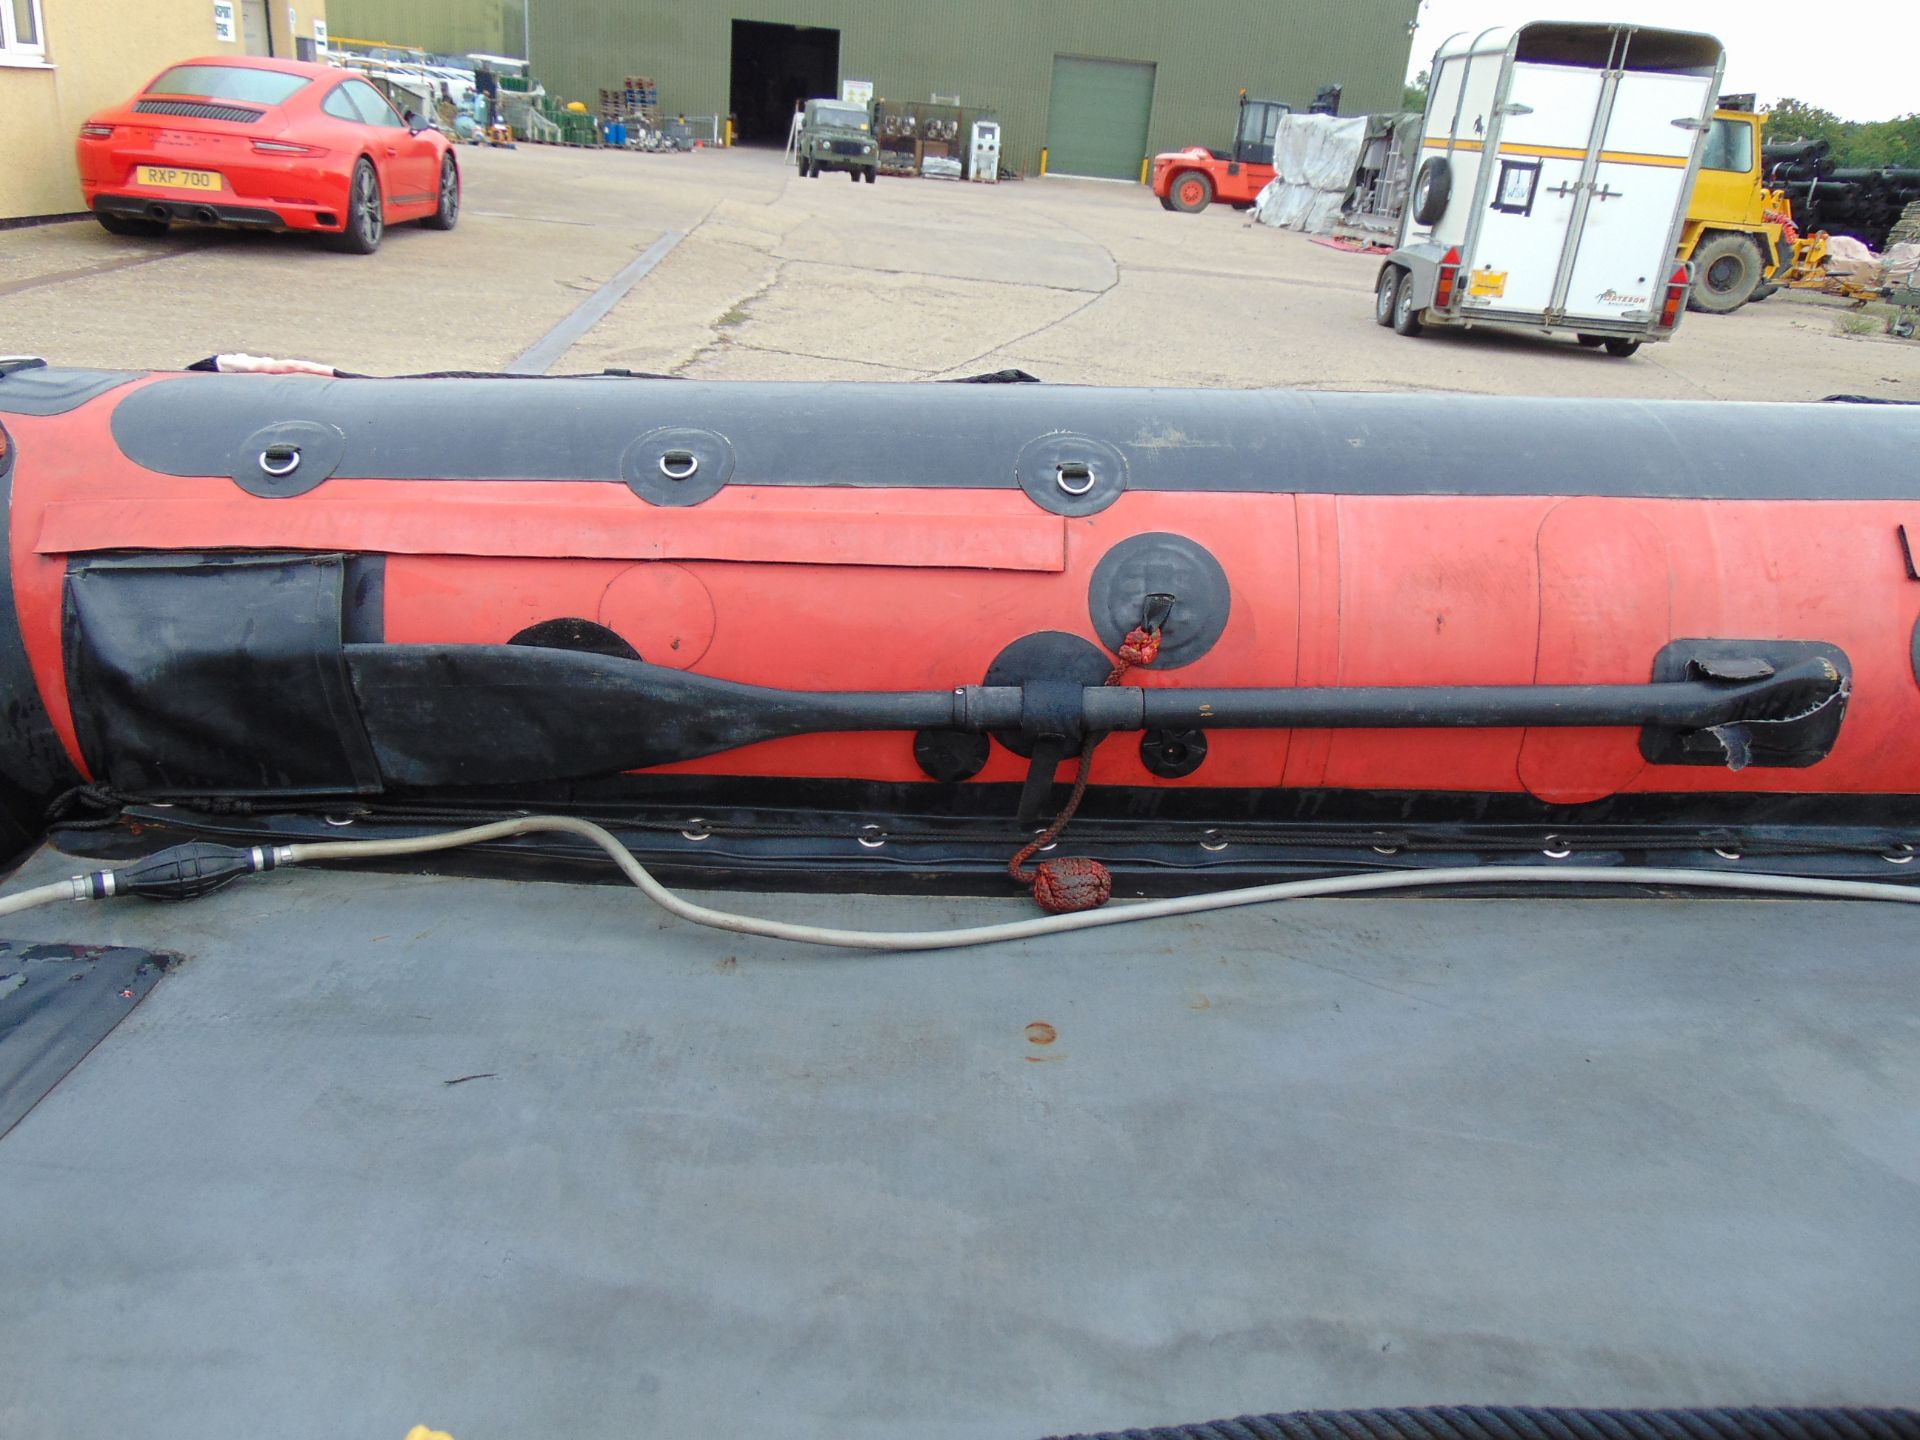 Eurocraft 440 Inflatable Rib C/W Mariner Outboard Motor and Transportation Trailer - Image 12 of 26